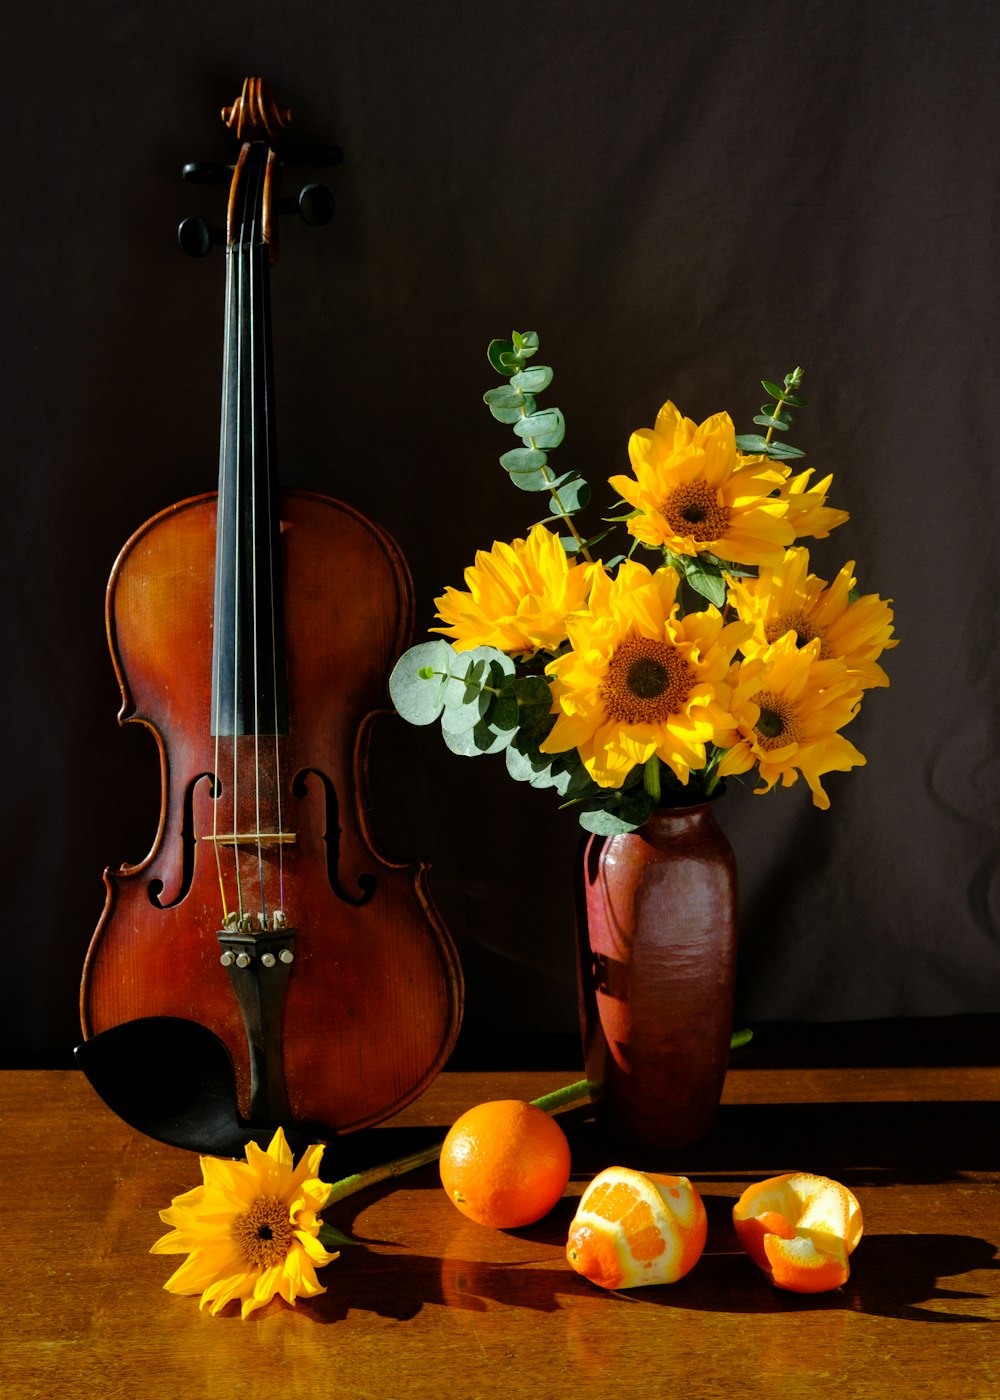 yellow and green flowers on brown violin